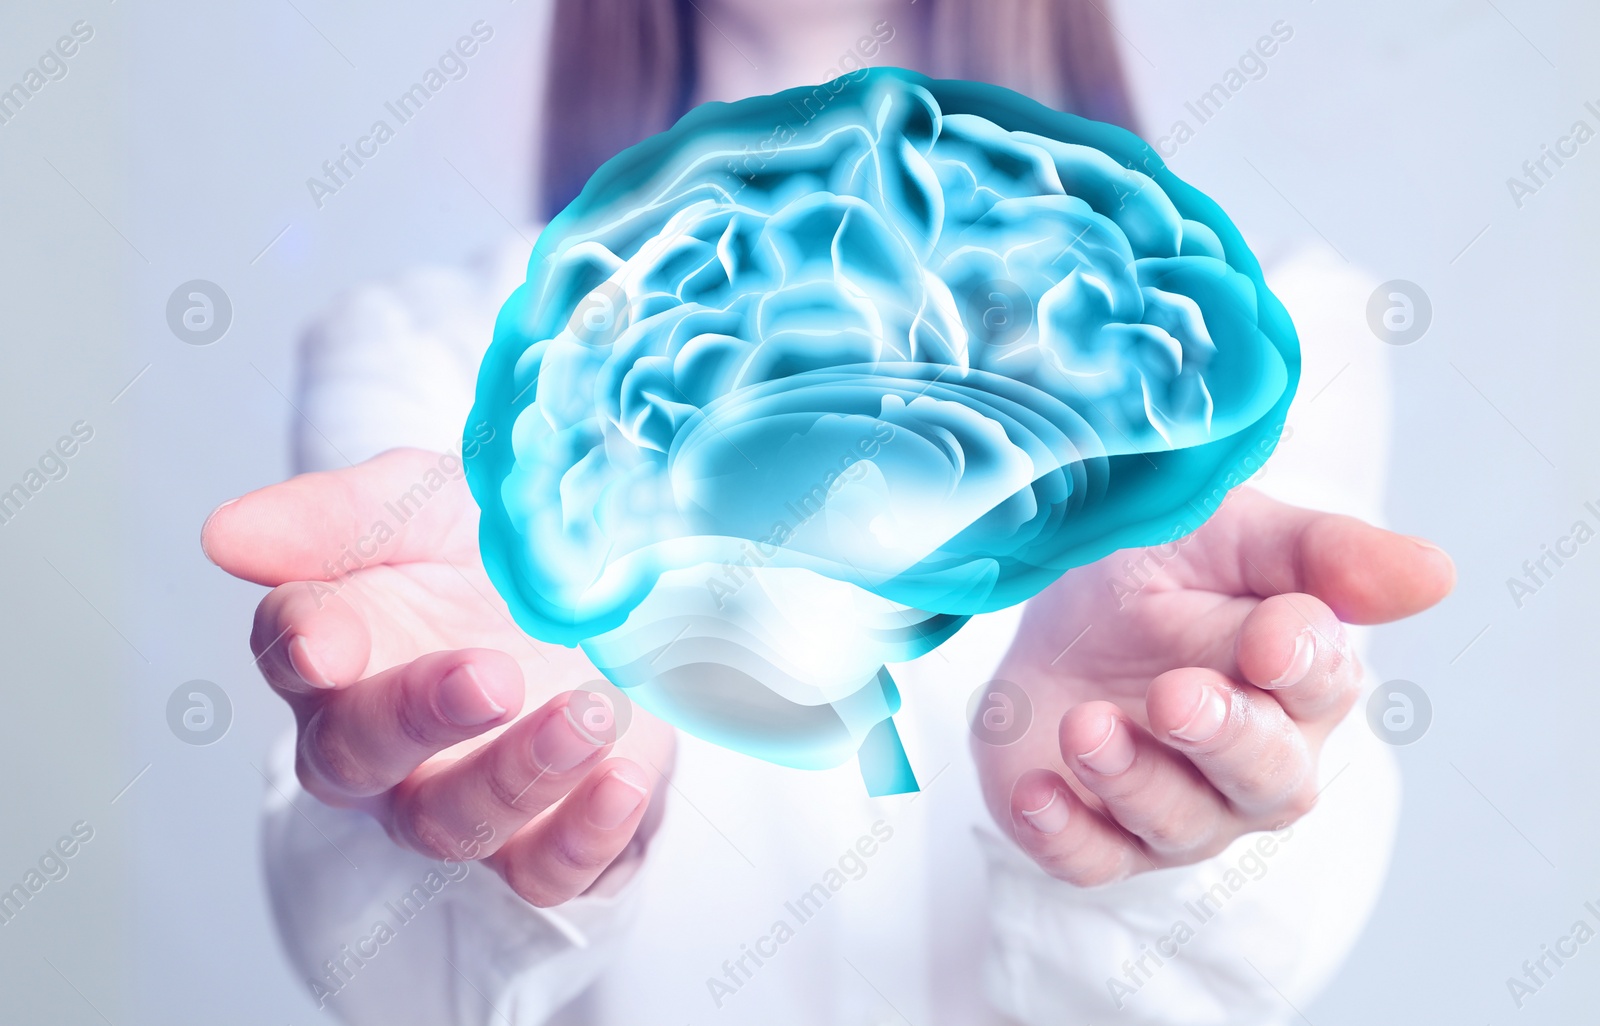 Image of Young woman holding digital image of brain in hands on white background, closeup